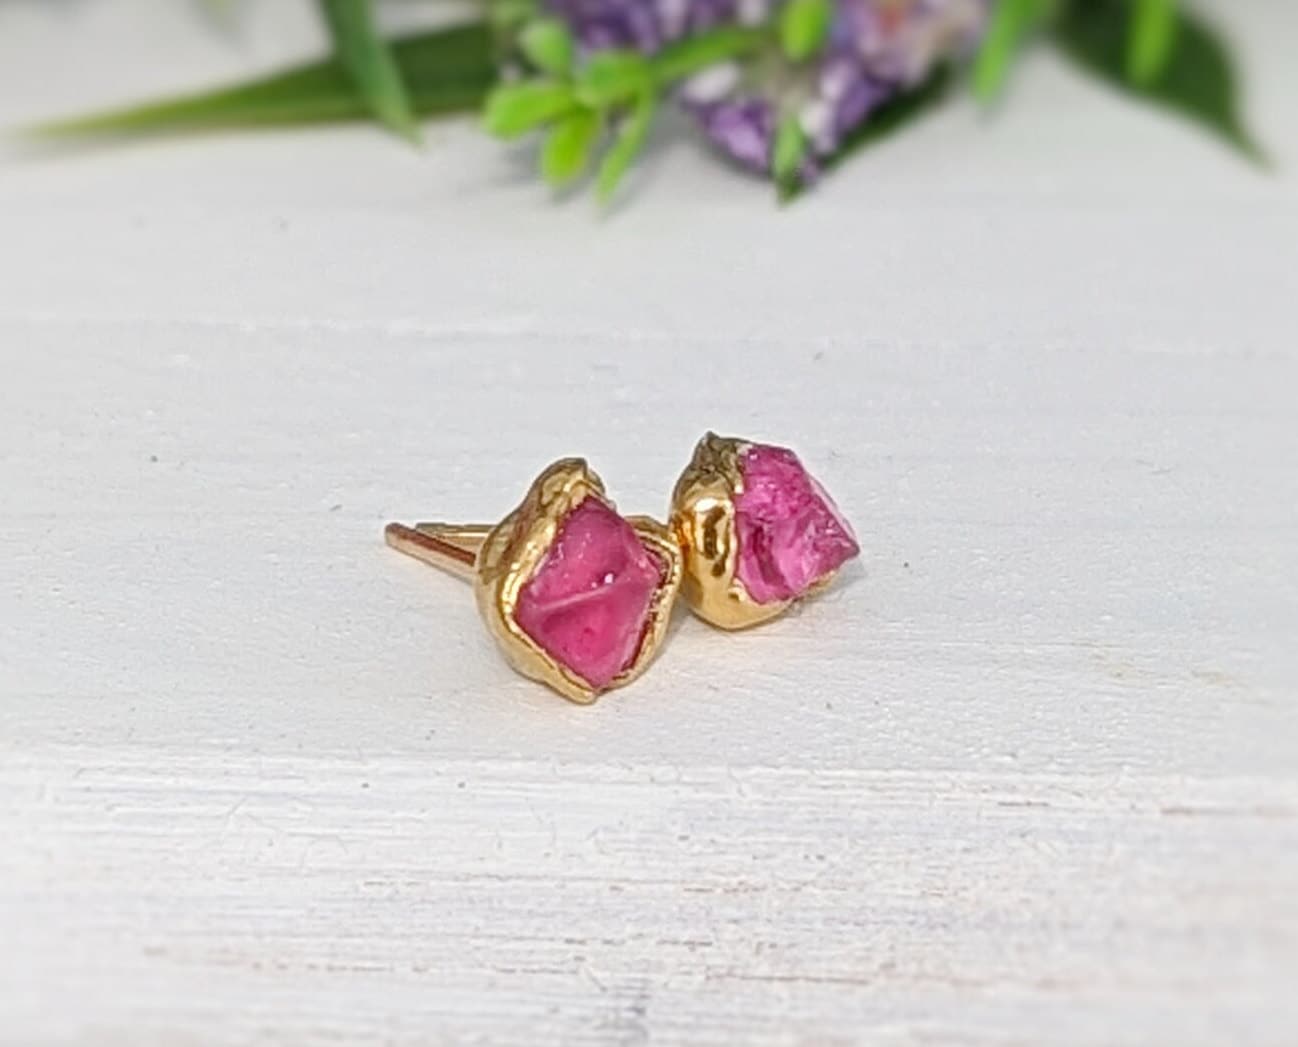 Raw Pink Spinel stud earrings in unique 18k Gold setting